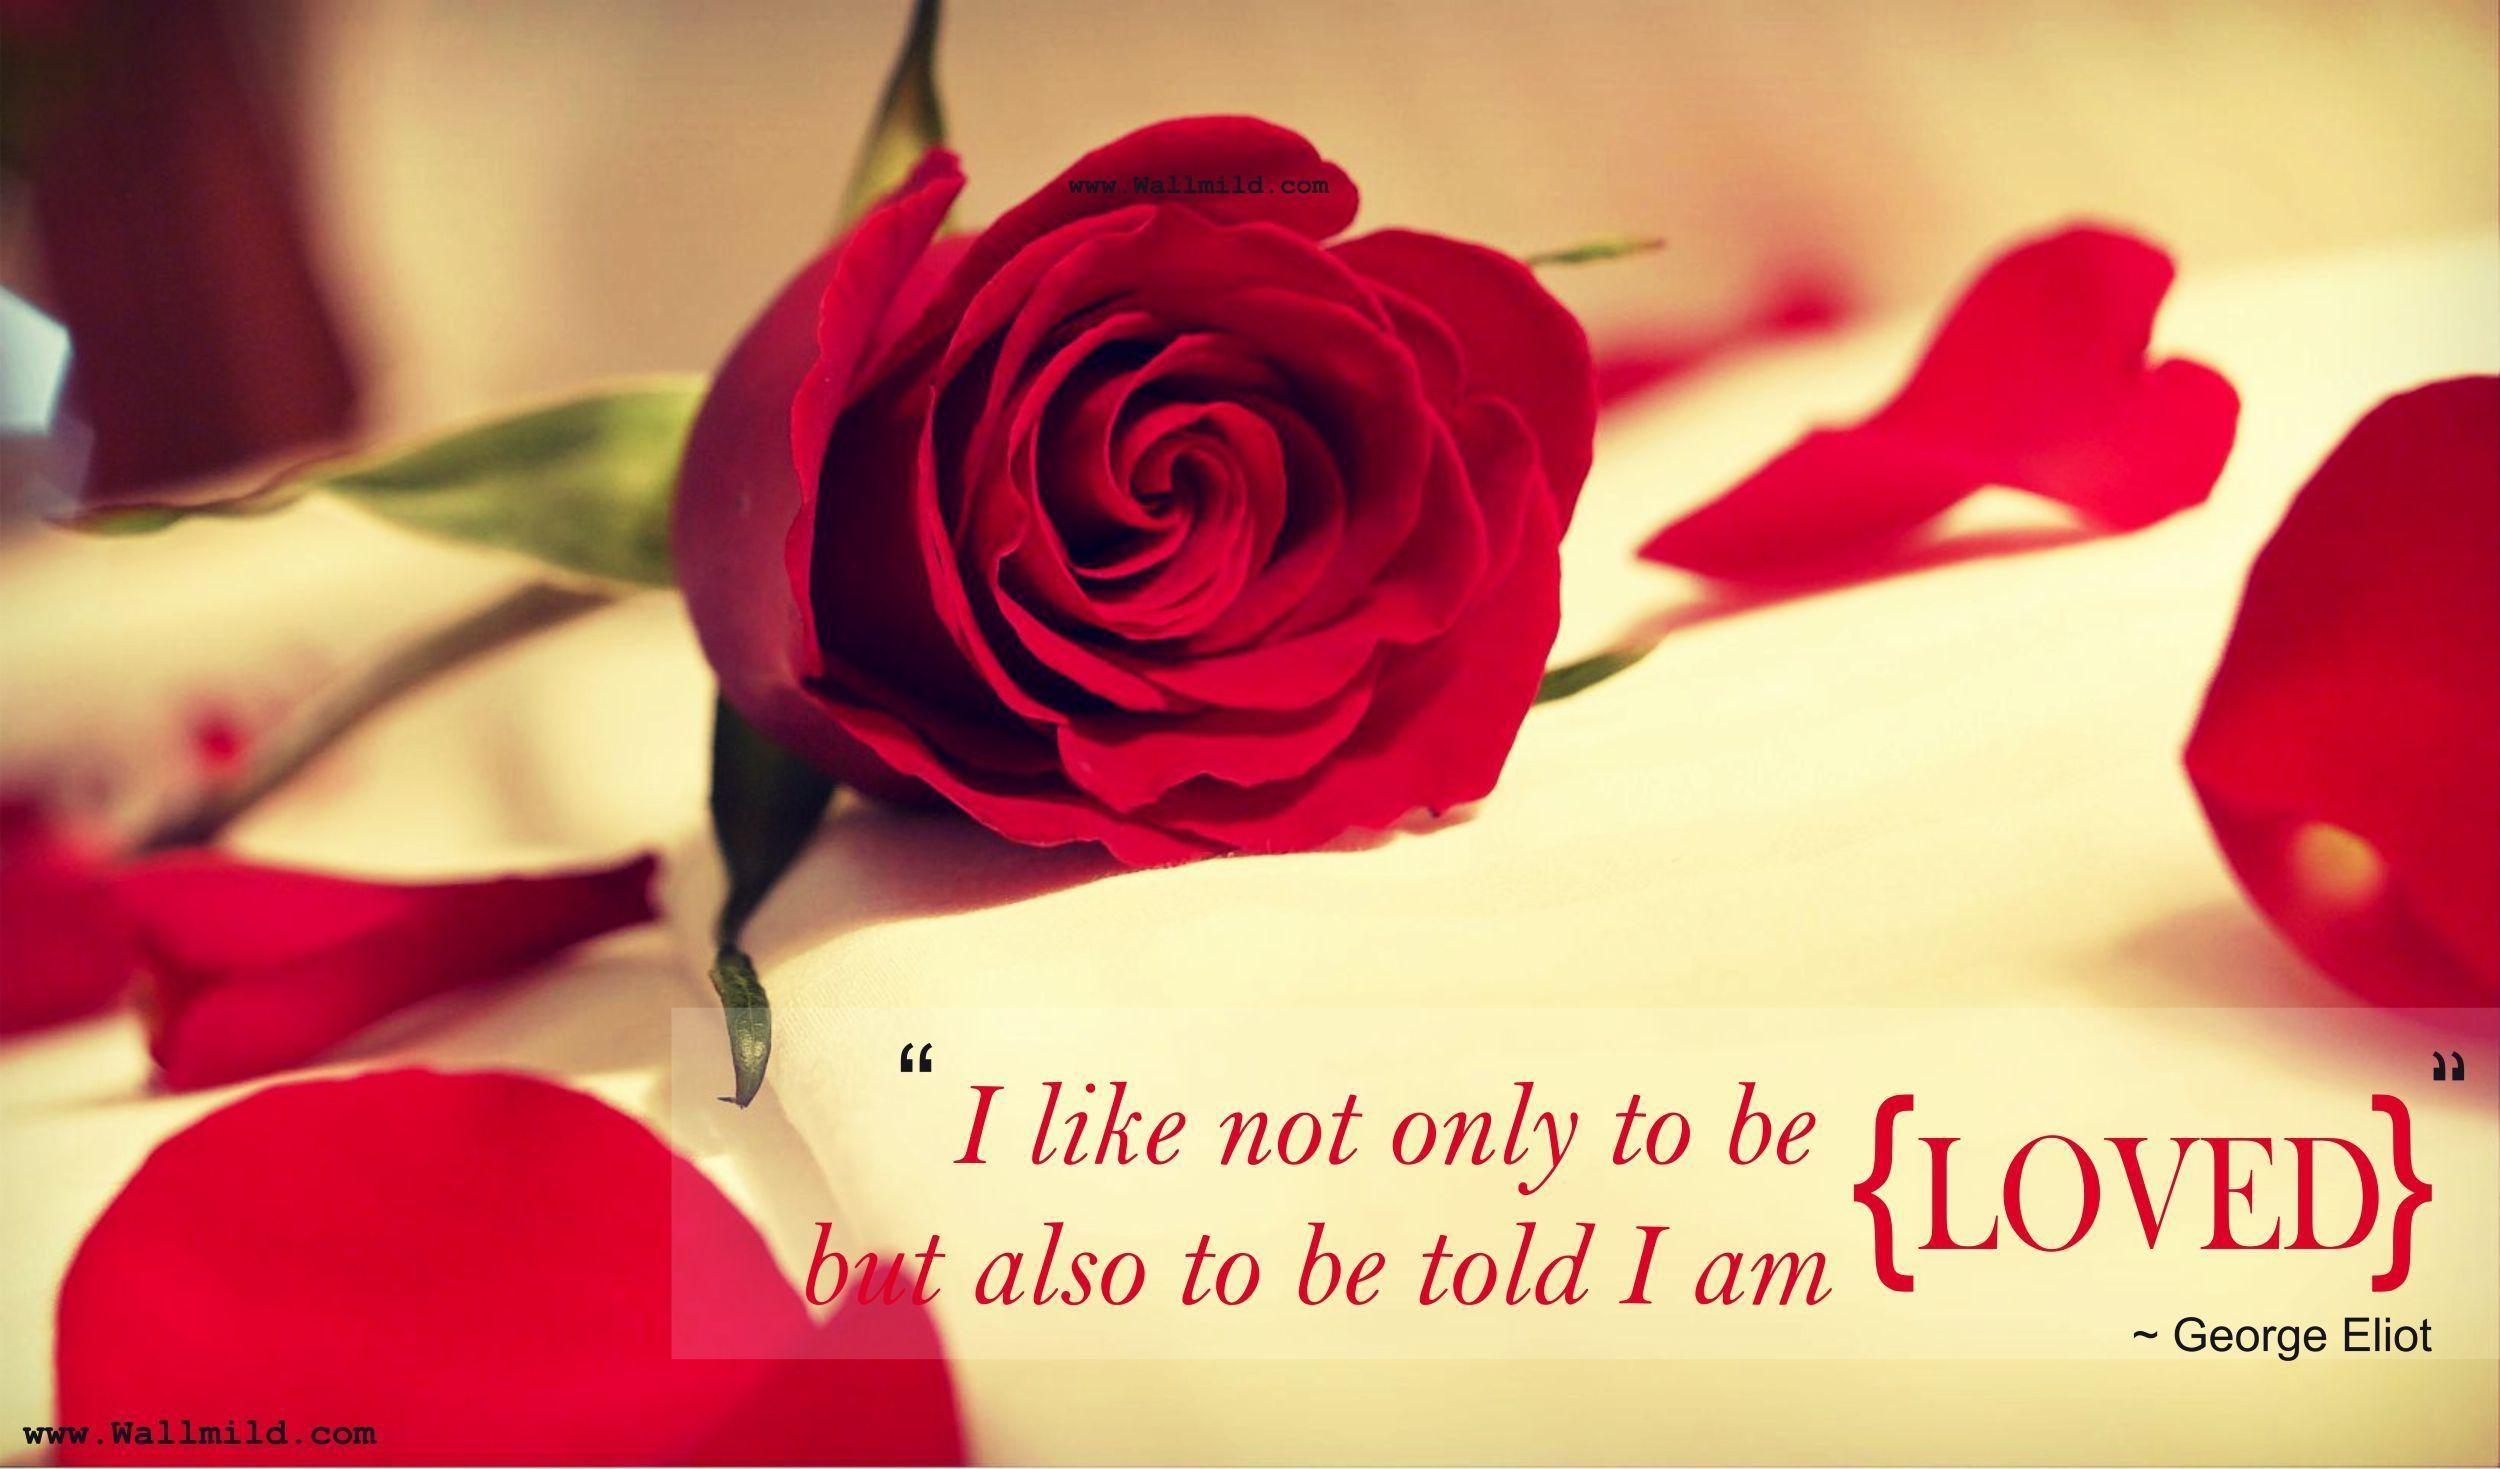 New Wallpaper of cute love quotes Wallpaper of cute love